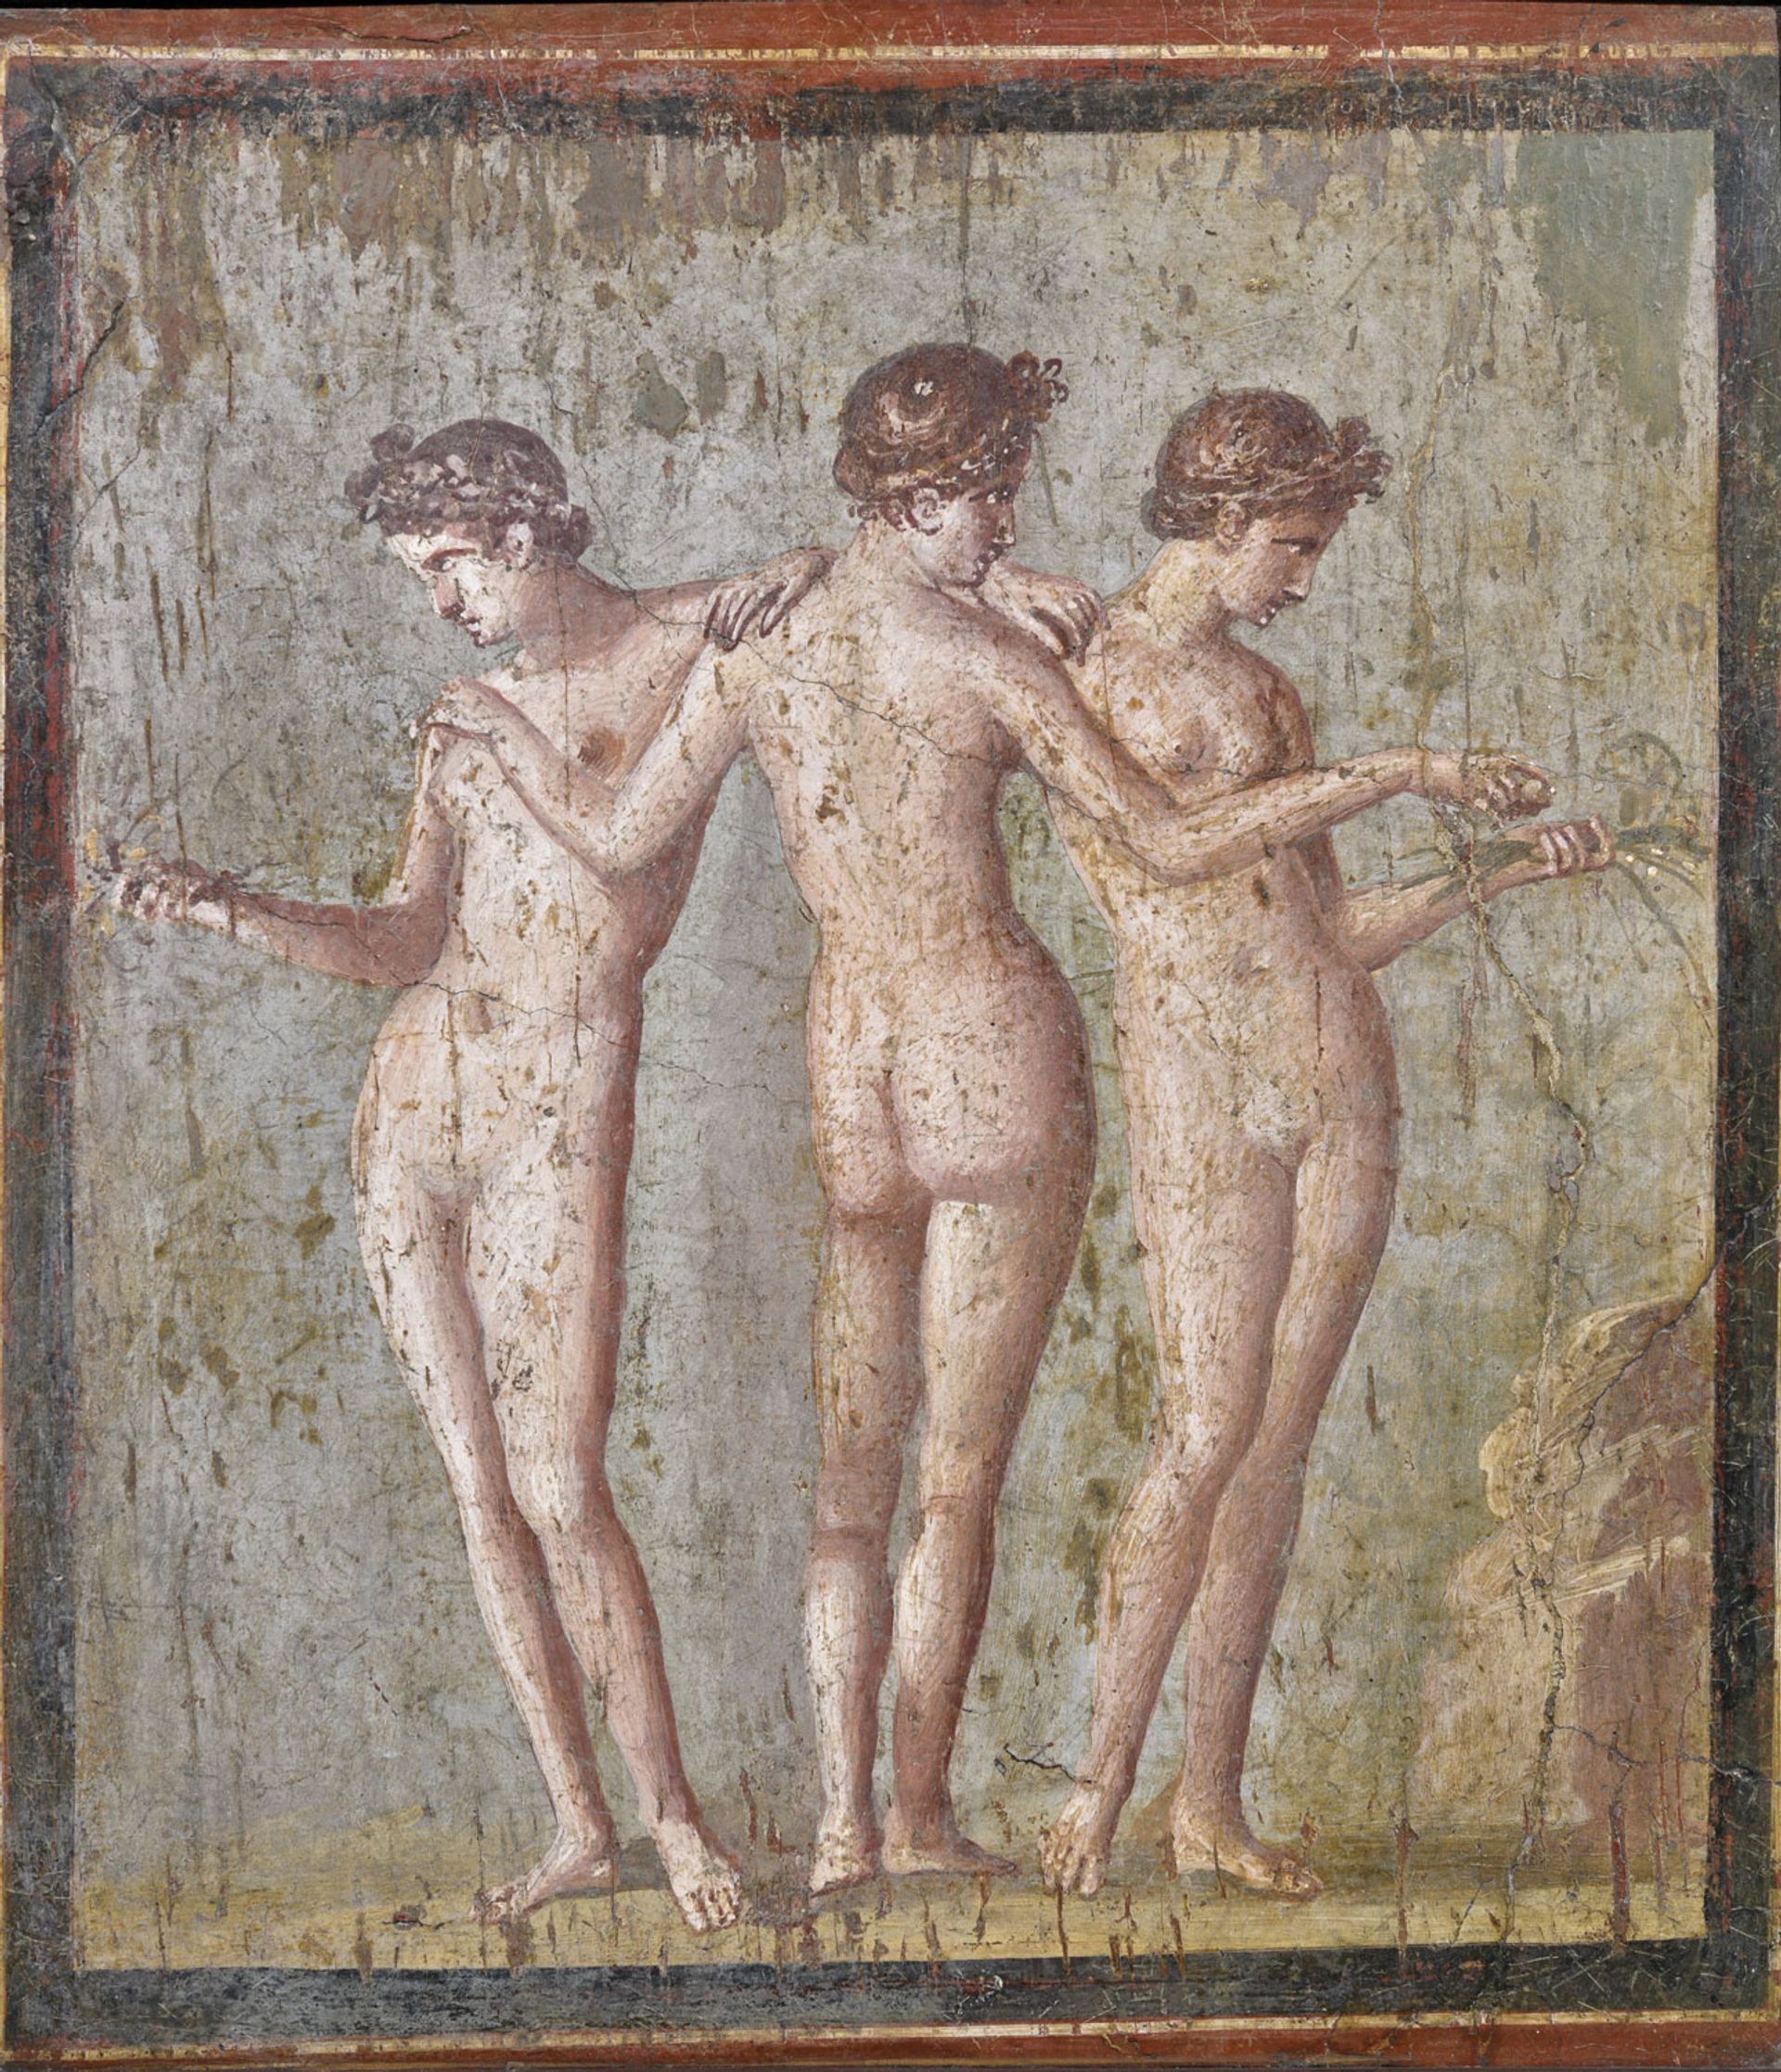 Among the Pompeian wall paintings leaving the museum vaults of Naples for a new show in Bologna is this androgynous depiction of The Three Graces, a subject that later inspired Botticelli and Raphael MANN; courtesy of the Museo Archeologico di Bologna



